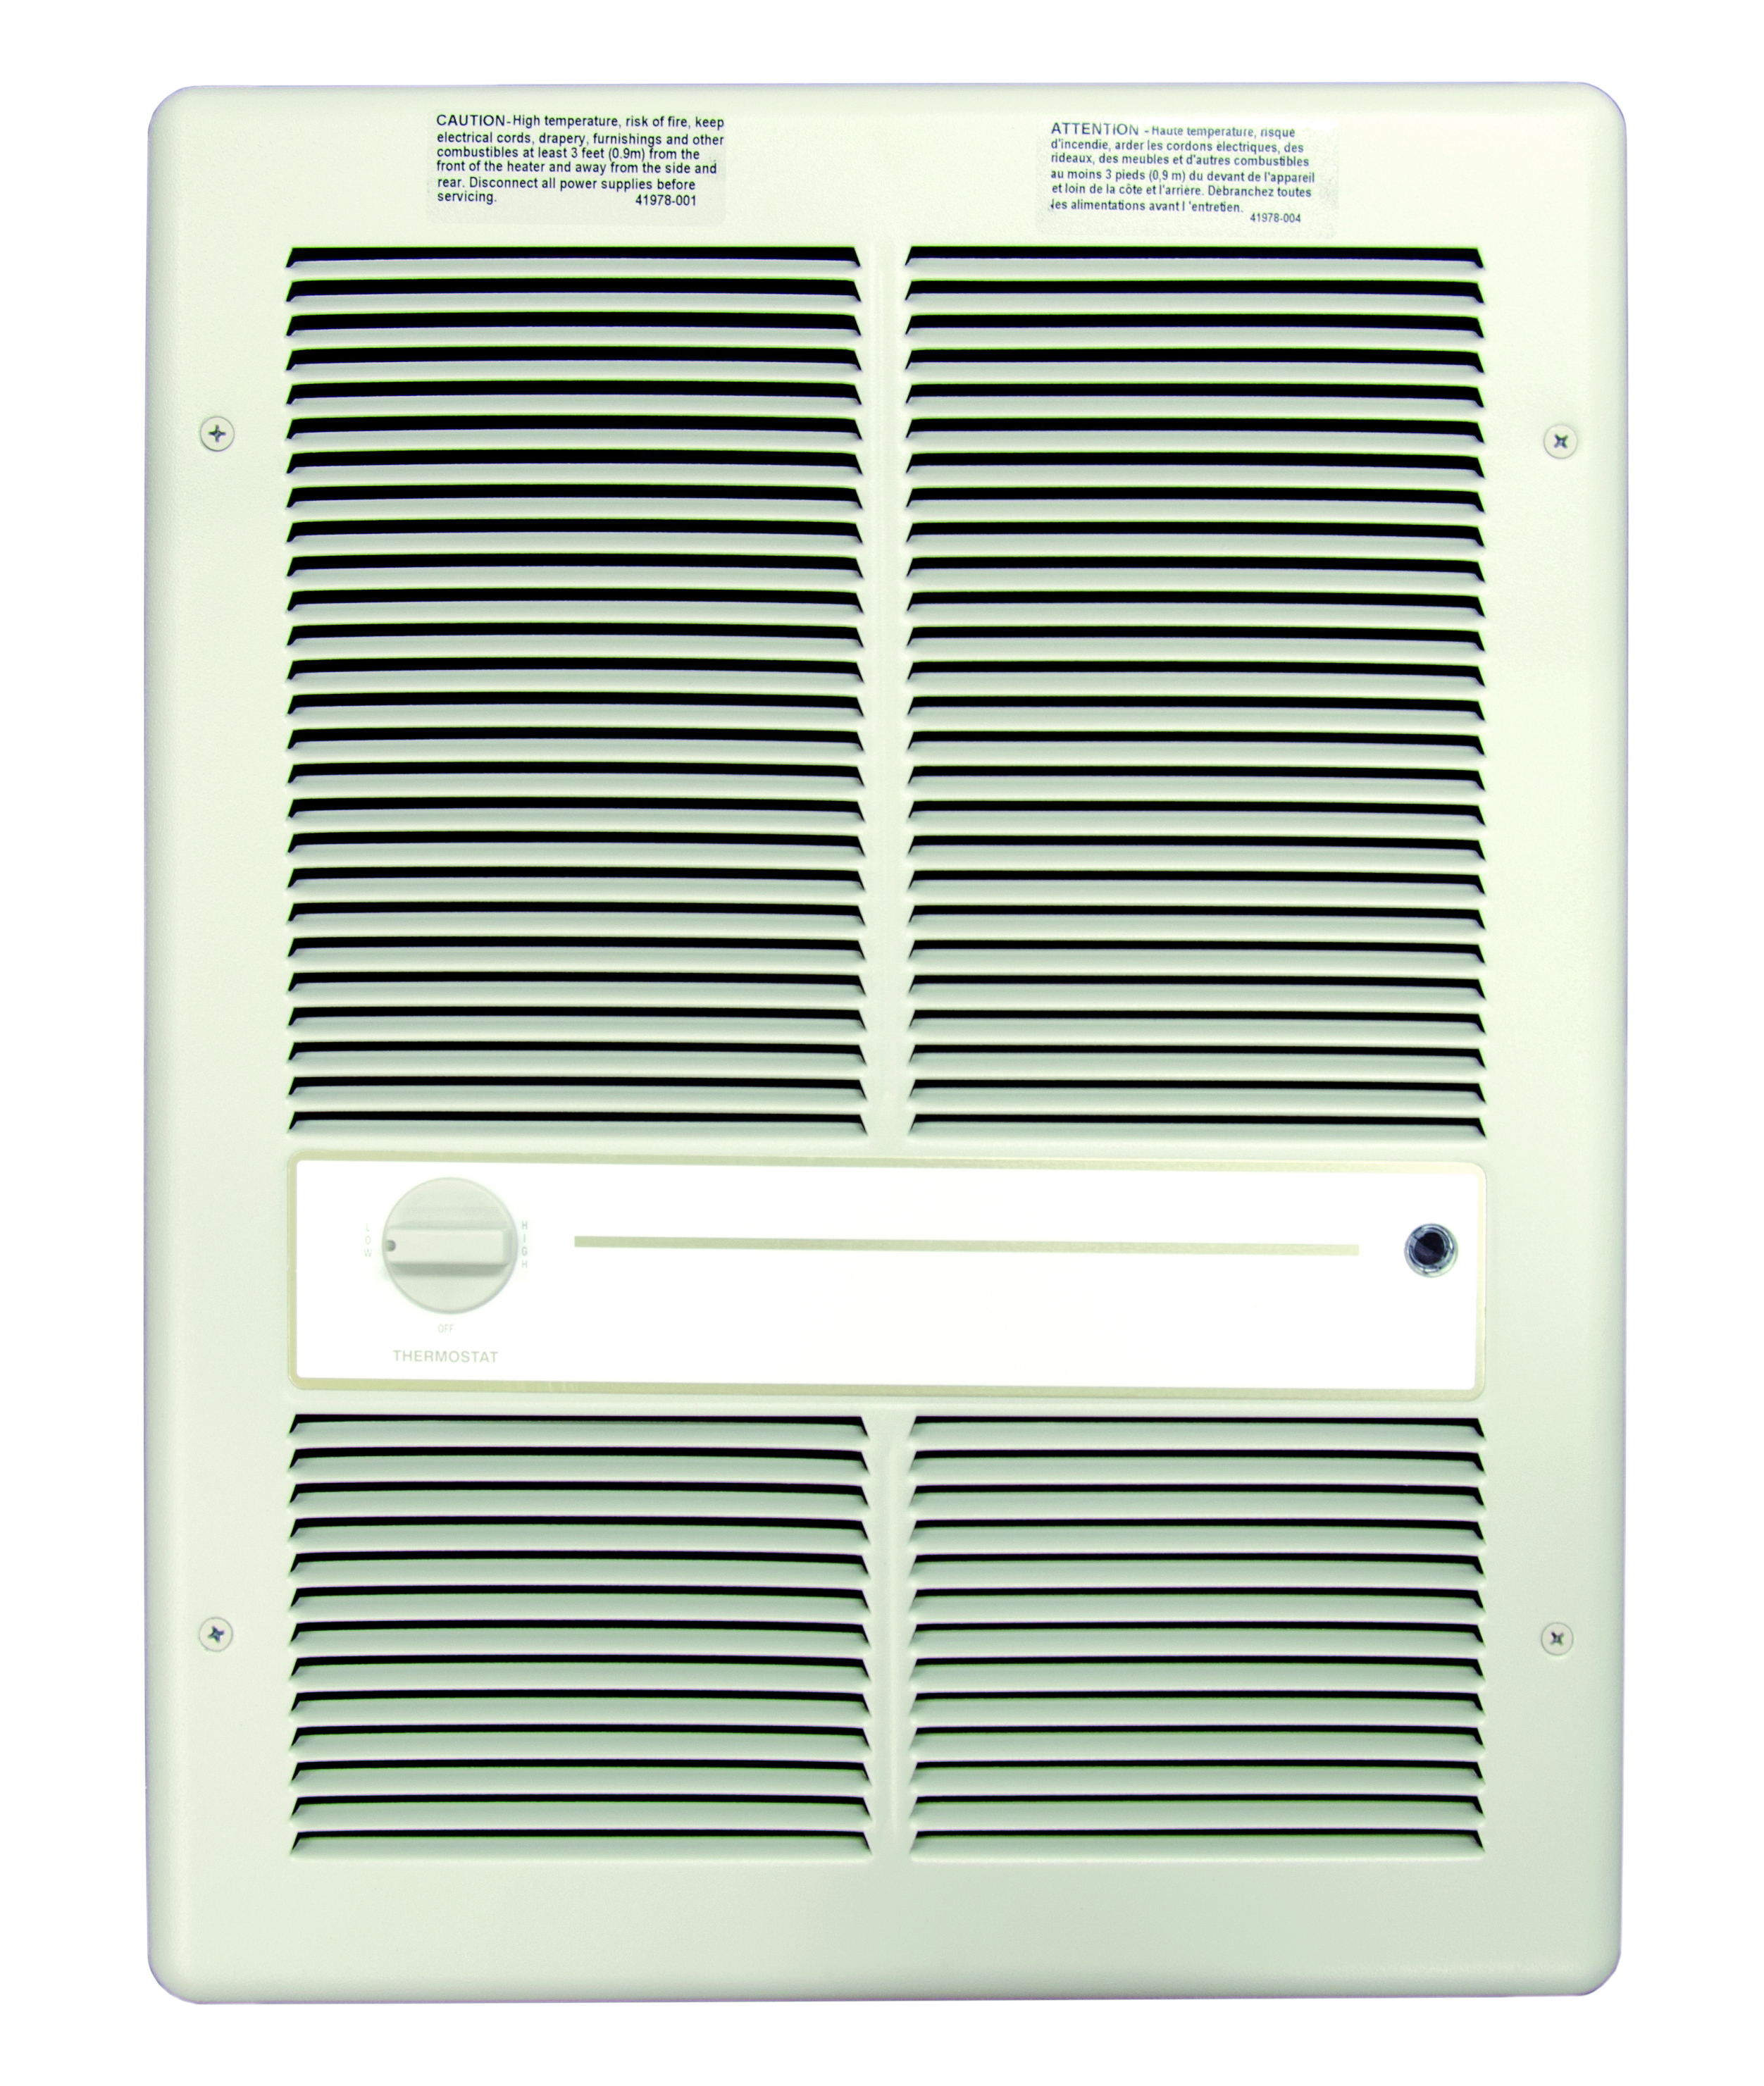 Fan Forced Wall Heater, Maximum Operating Temperature- 90 (Thermostat) DEG F 1 PH, 4800 WTT, 240 V, Wall Mounting, Steel Housing Material, Dimensions- 14-3/16 Width X 19-15/16 Height X 4 Depth IN, BTU Rating- 16380, 20 AMP, White